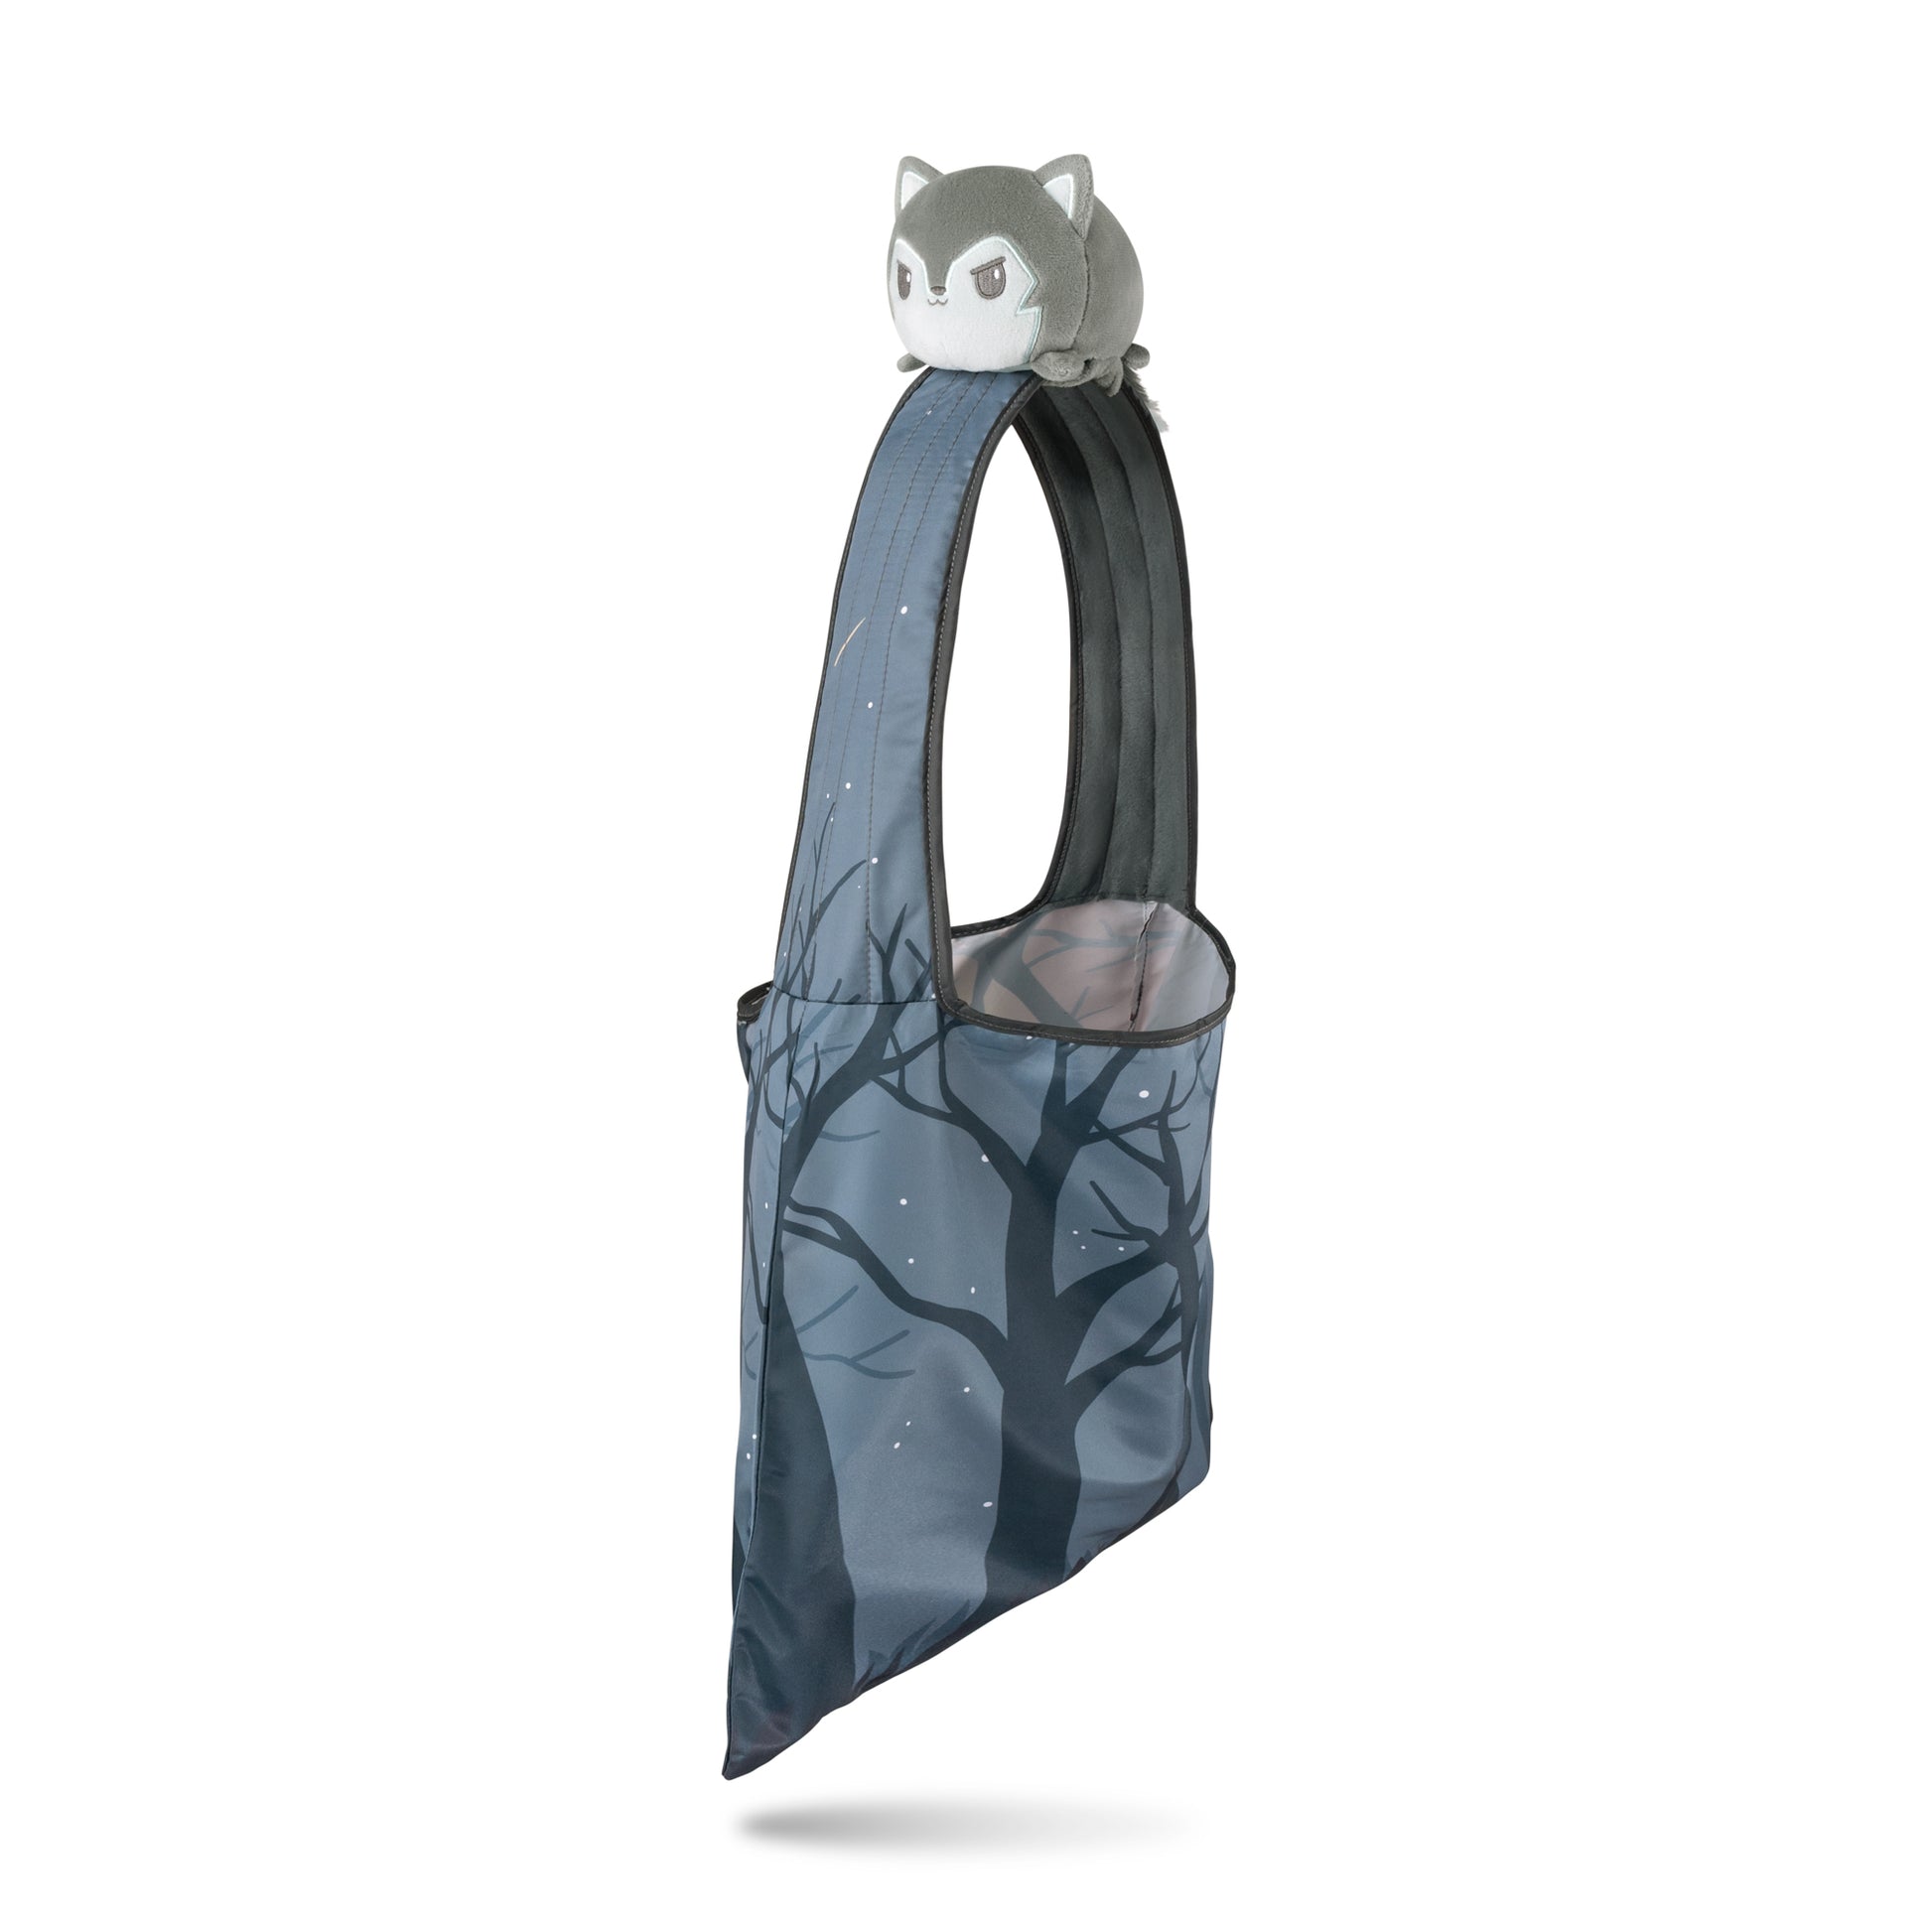 A blue TeeTurtle Plushiverse Moonlit Wolf Plushie Tote Bag with a owl on it, perfect for storing TeeTurtle plushies or as a convenient storage pouch.